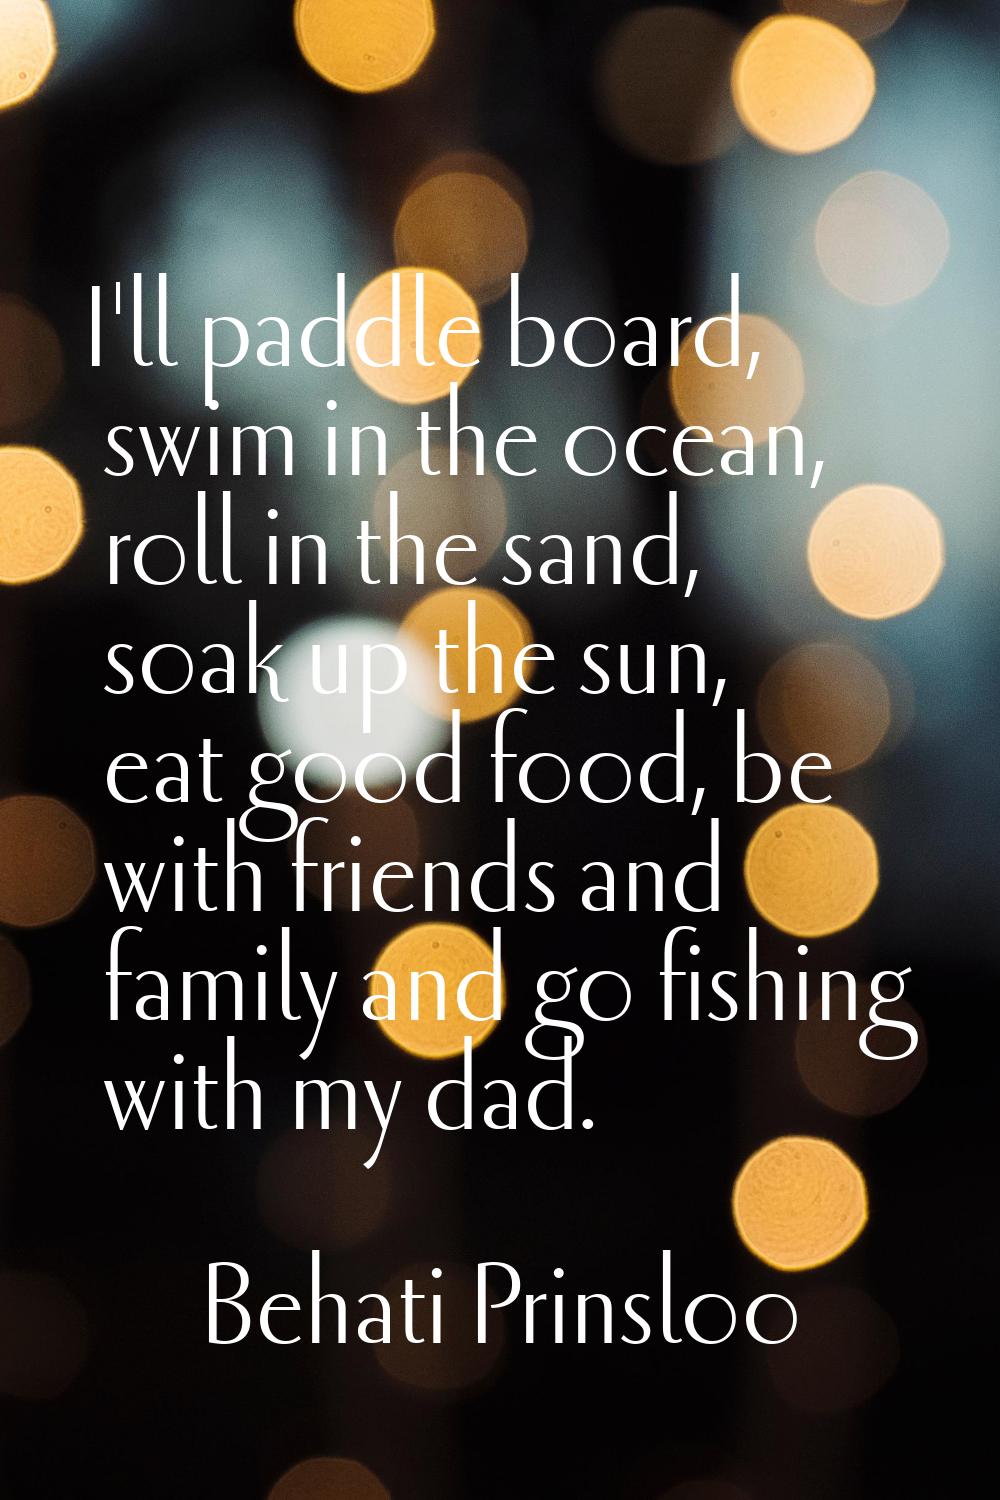 I'll paddle board, swim in the ocean, roll in the sand, soak up the sun, eat good food, be with fri